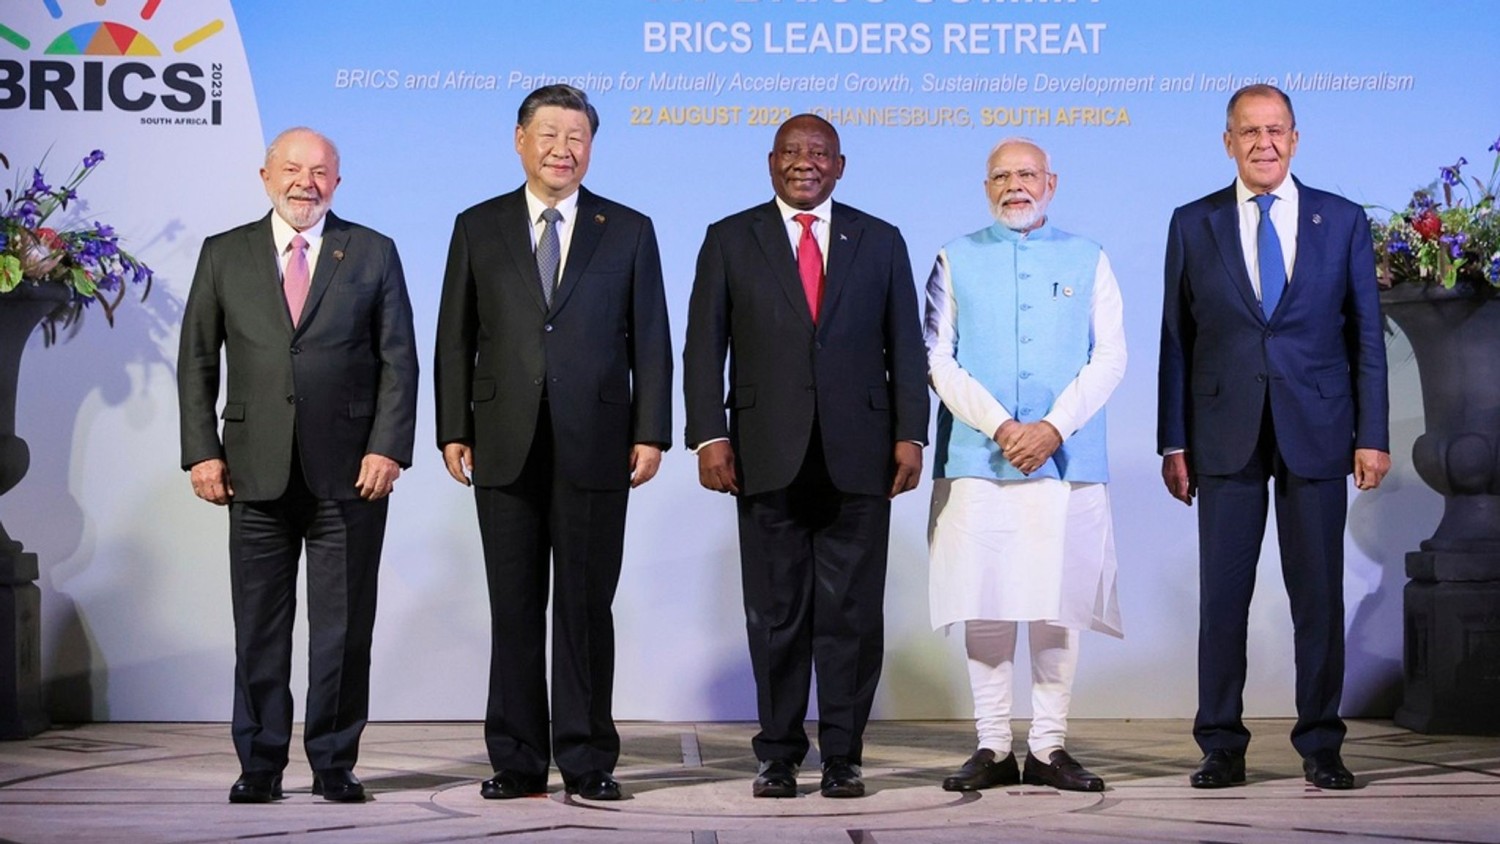 Chinese President Xi Jinping, second from left, with other world leaders at the BRICS summit. Pic: AP